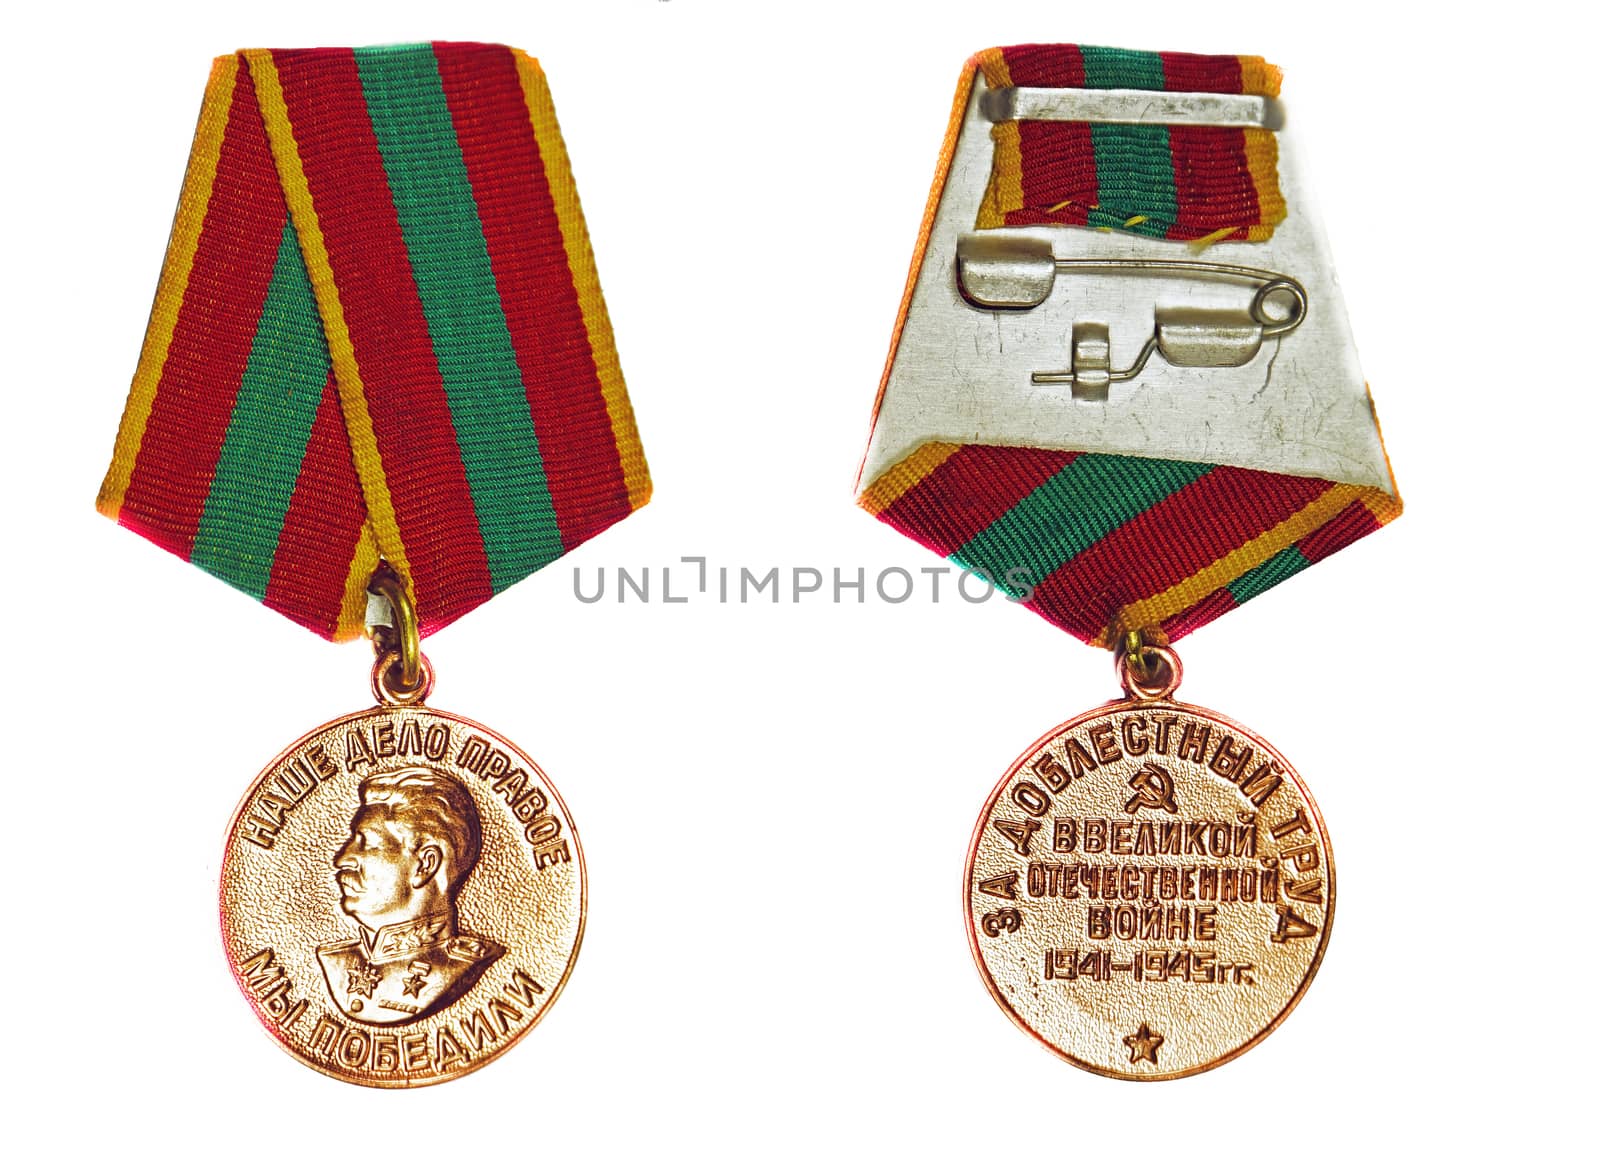 Medal  "For valorous work in the Great Patriotic War of 1941-1945" (with the reverse side) on a white background